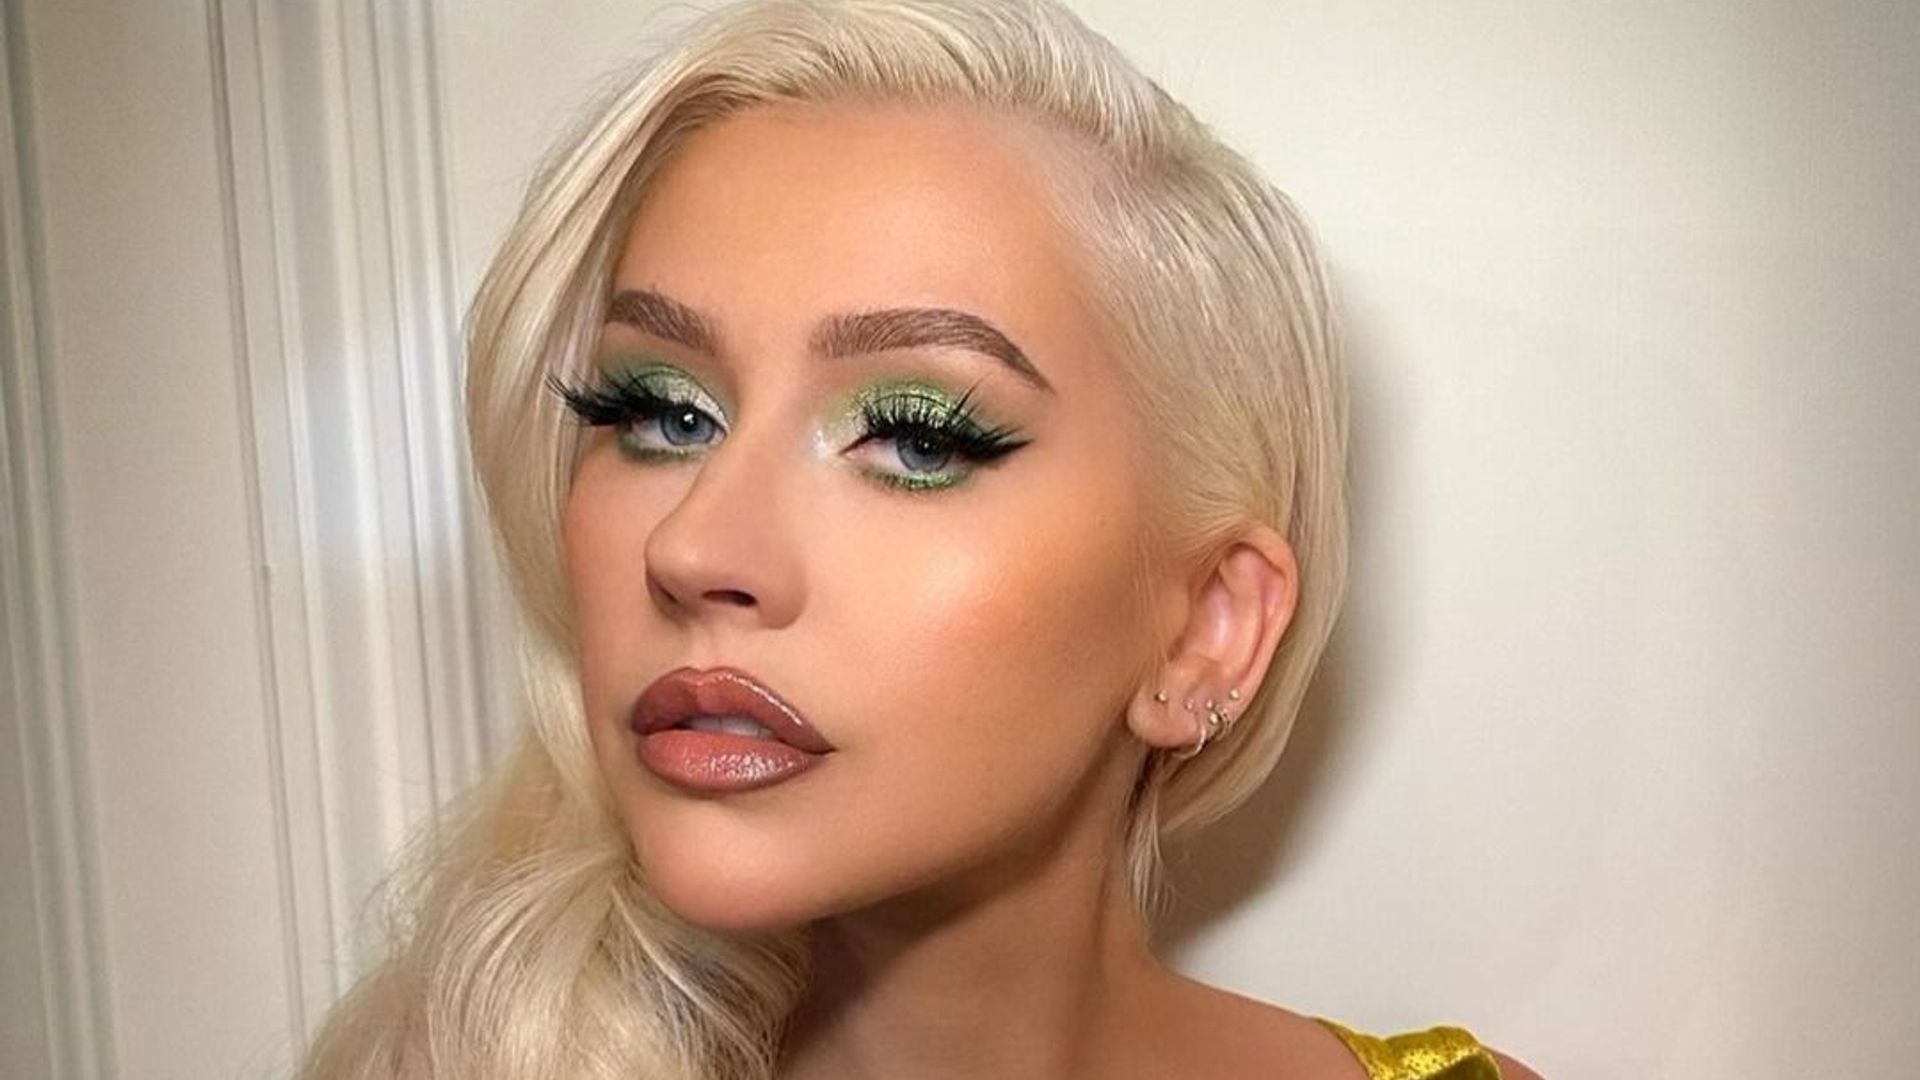 Christina Aguilera in yellow dress with platinum blonde hair and green eyeshadow